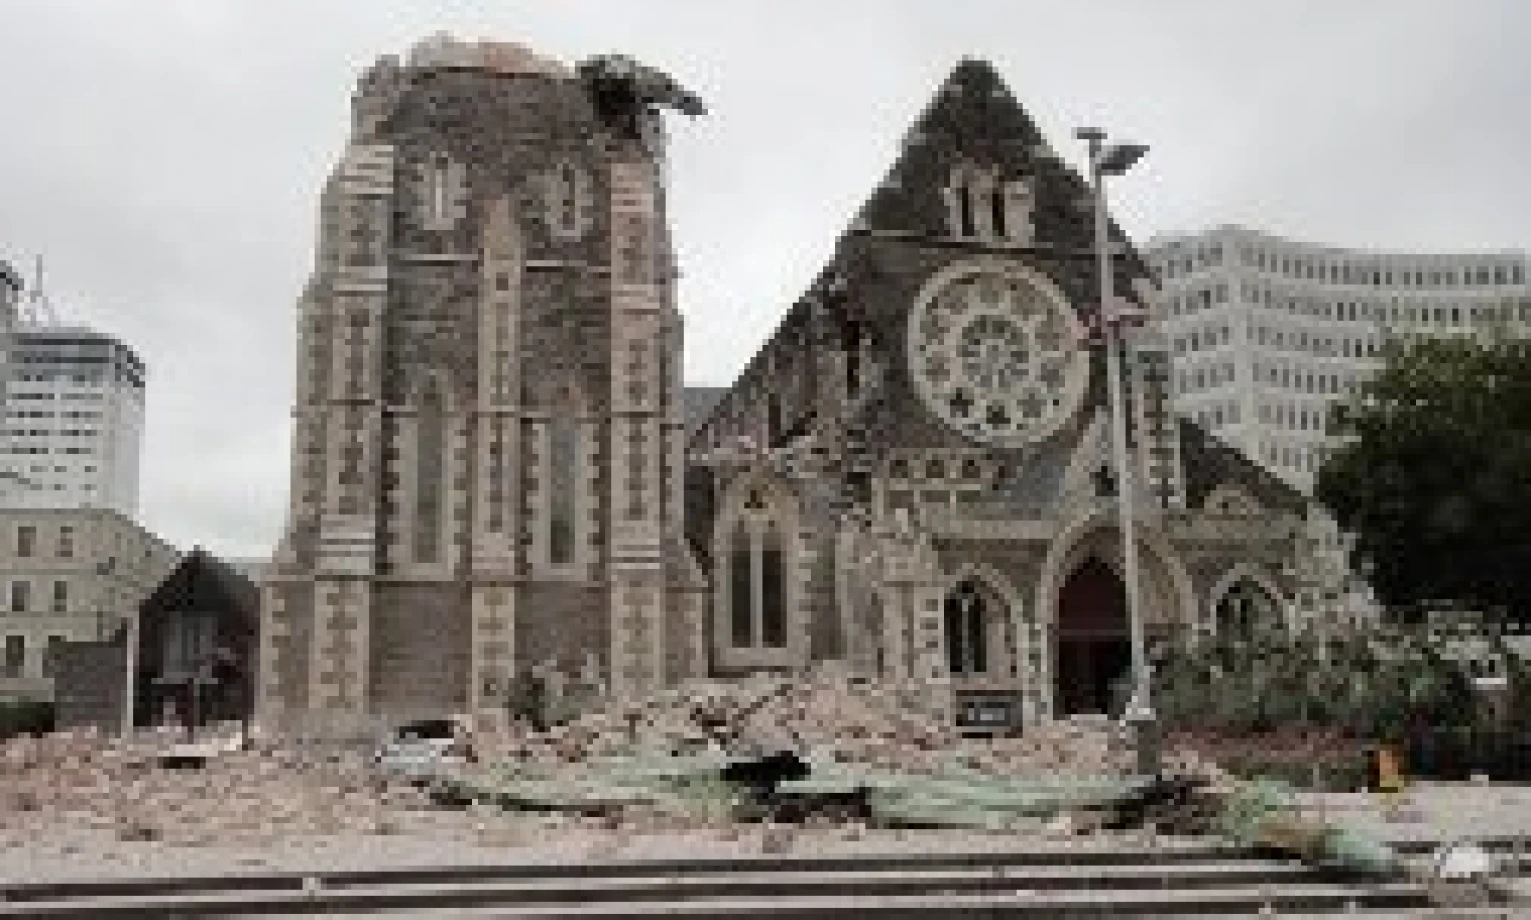 Cathedral to be deconsecrated